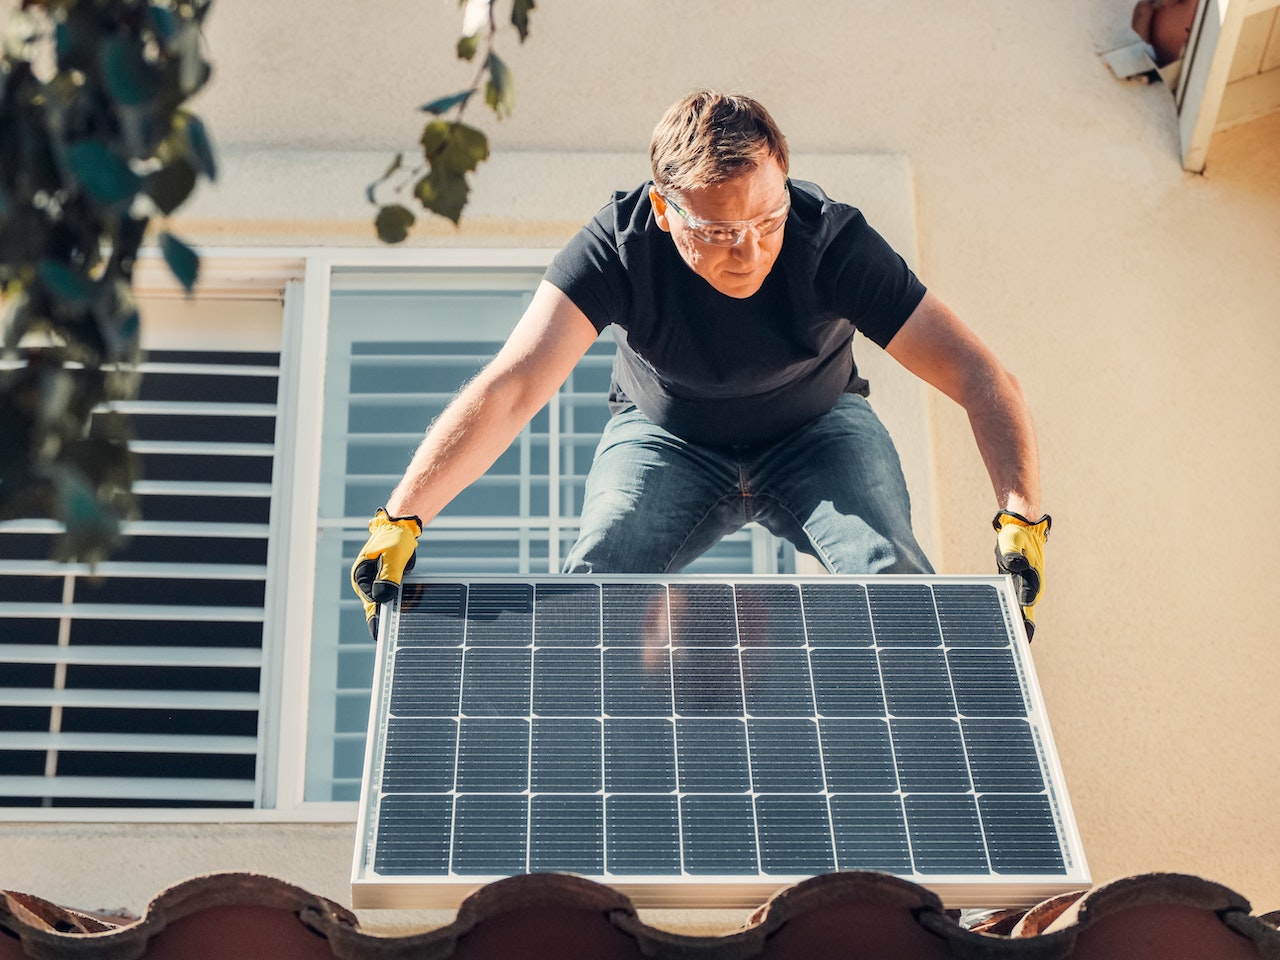 Essential Things to Consider Before Installing Solar Panels For Your Home